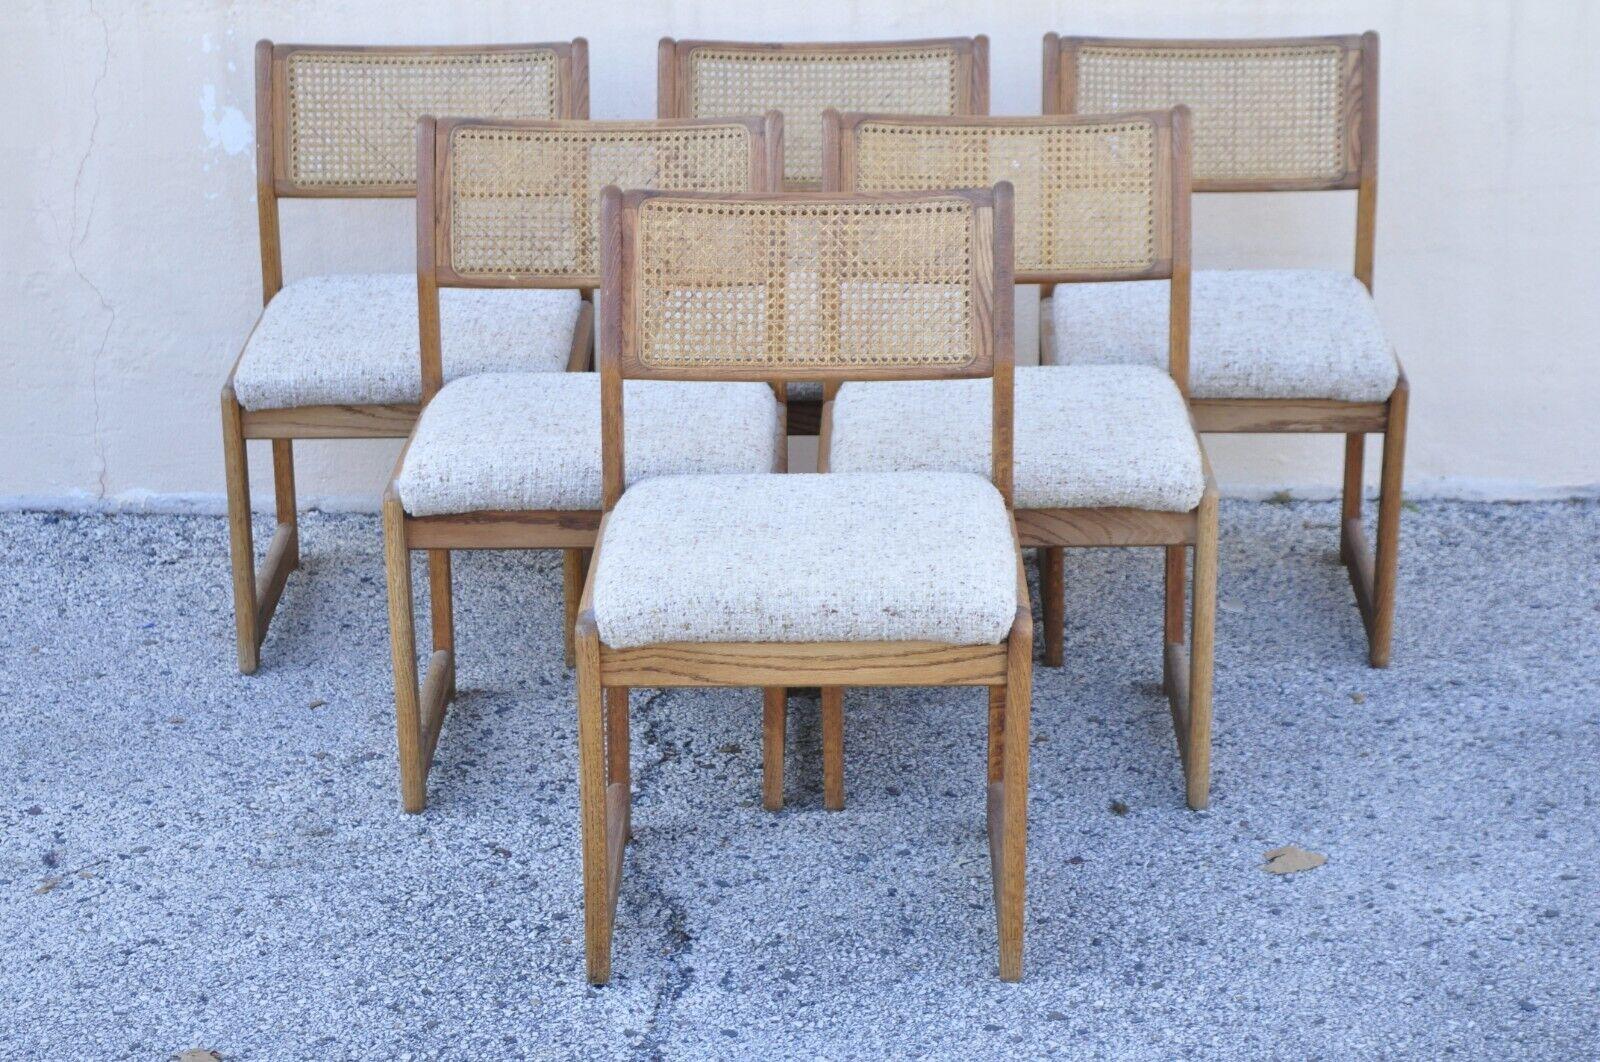 Whitaker Furniture Oak Wood Cane Back Modern Dining Side Chairs - Set of 6. Item features  (6) Side chairs, oak wood frames, cane back panels, oatmeal colored Nubby wool upholstery. Circa Late 20th Century. Measurements: 32